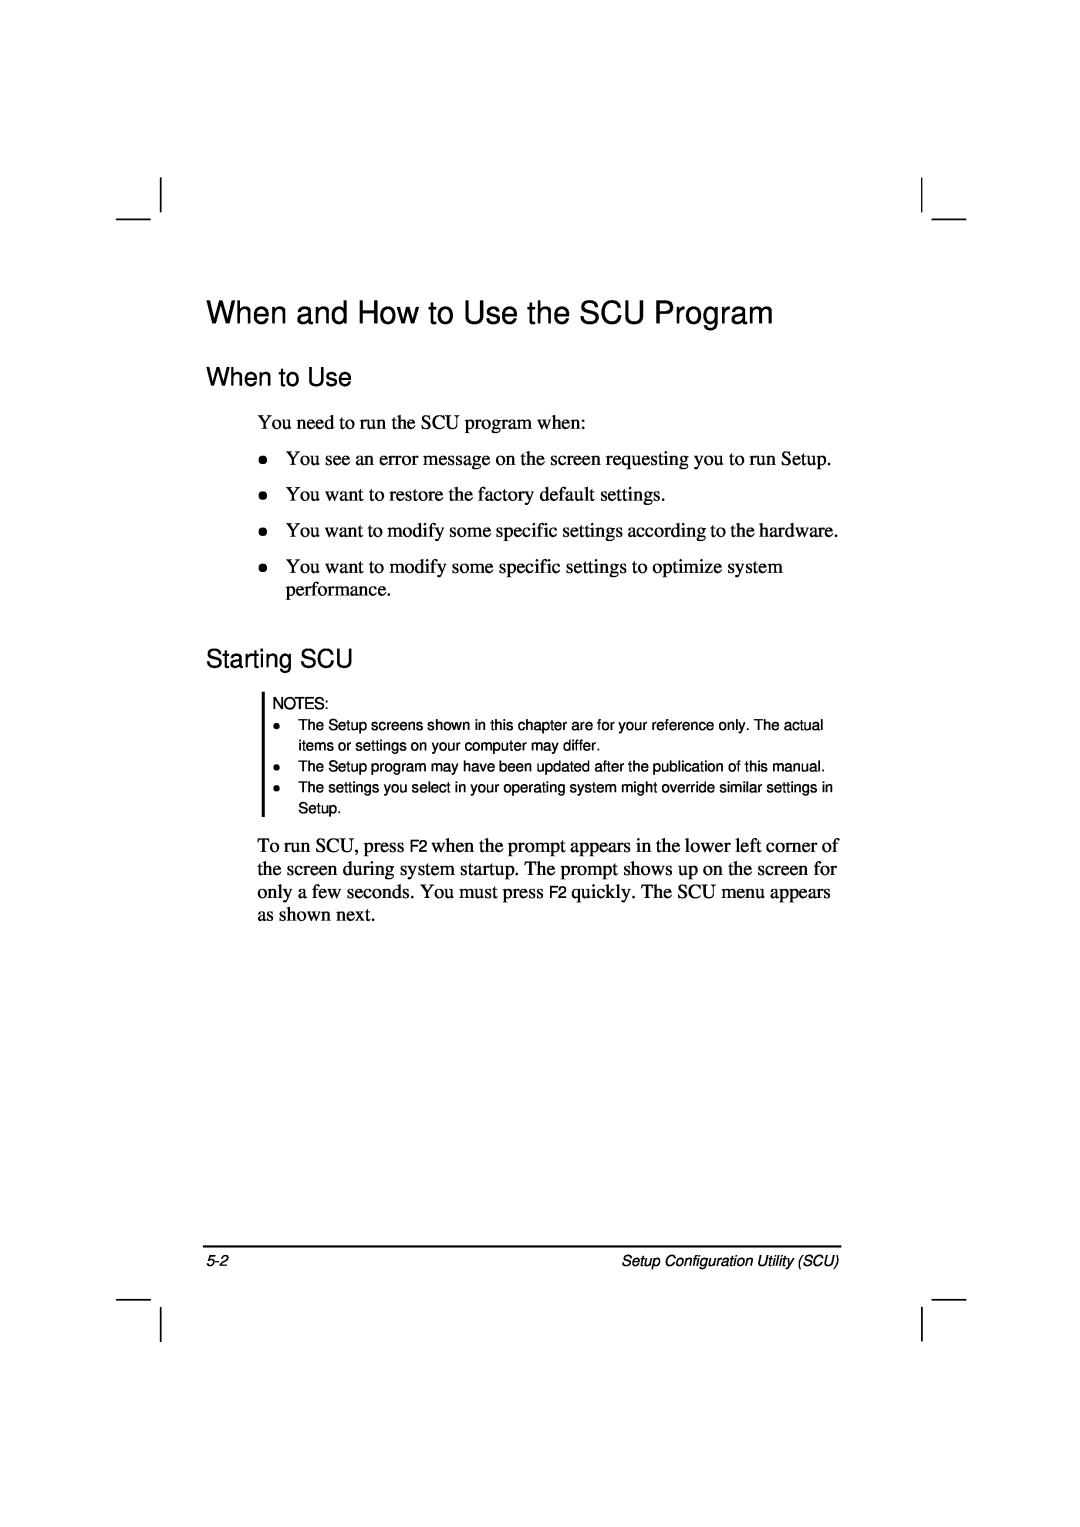 Casio HK1223 owner manual When and How to Use the SCU Program, When to Use, Starting SCU 